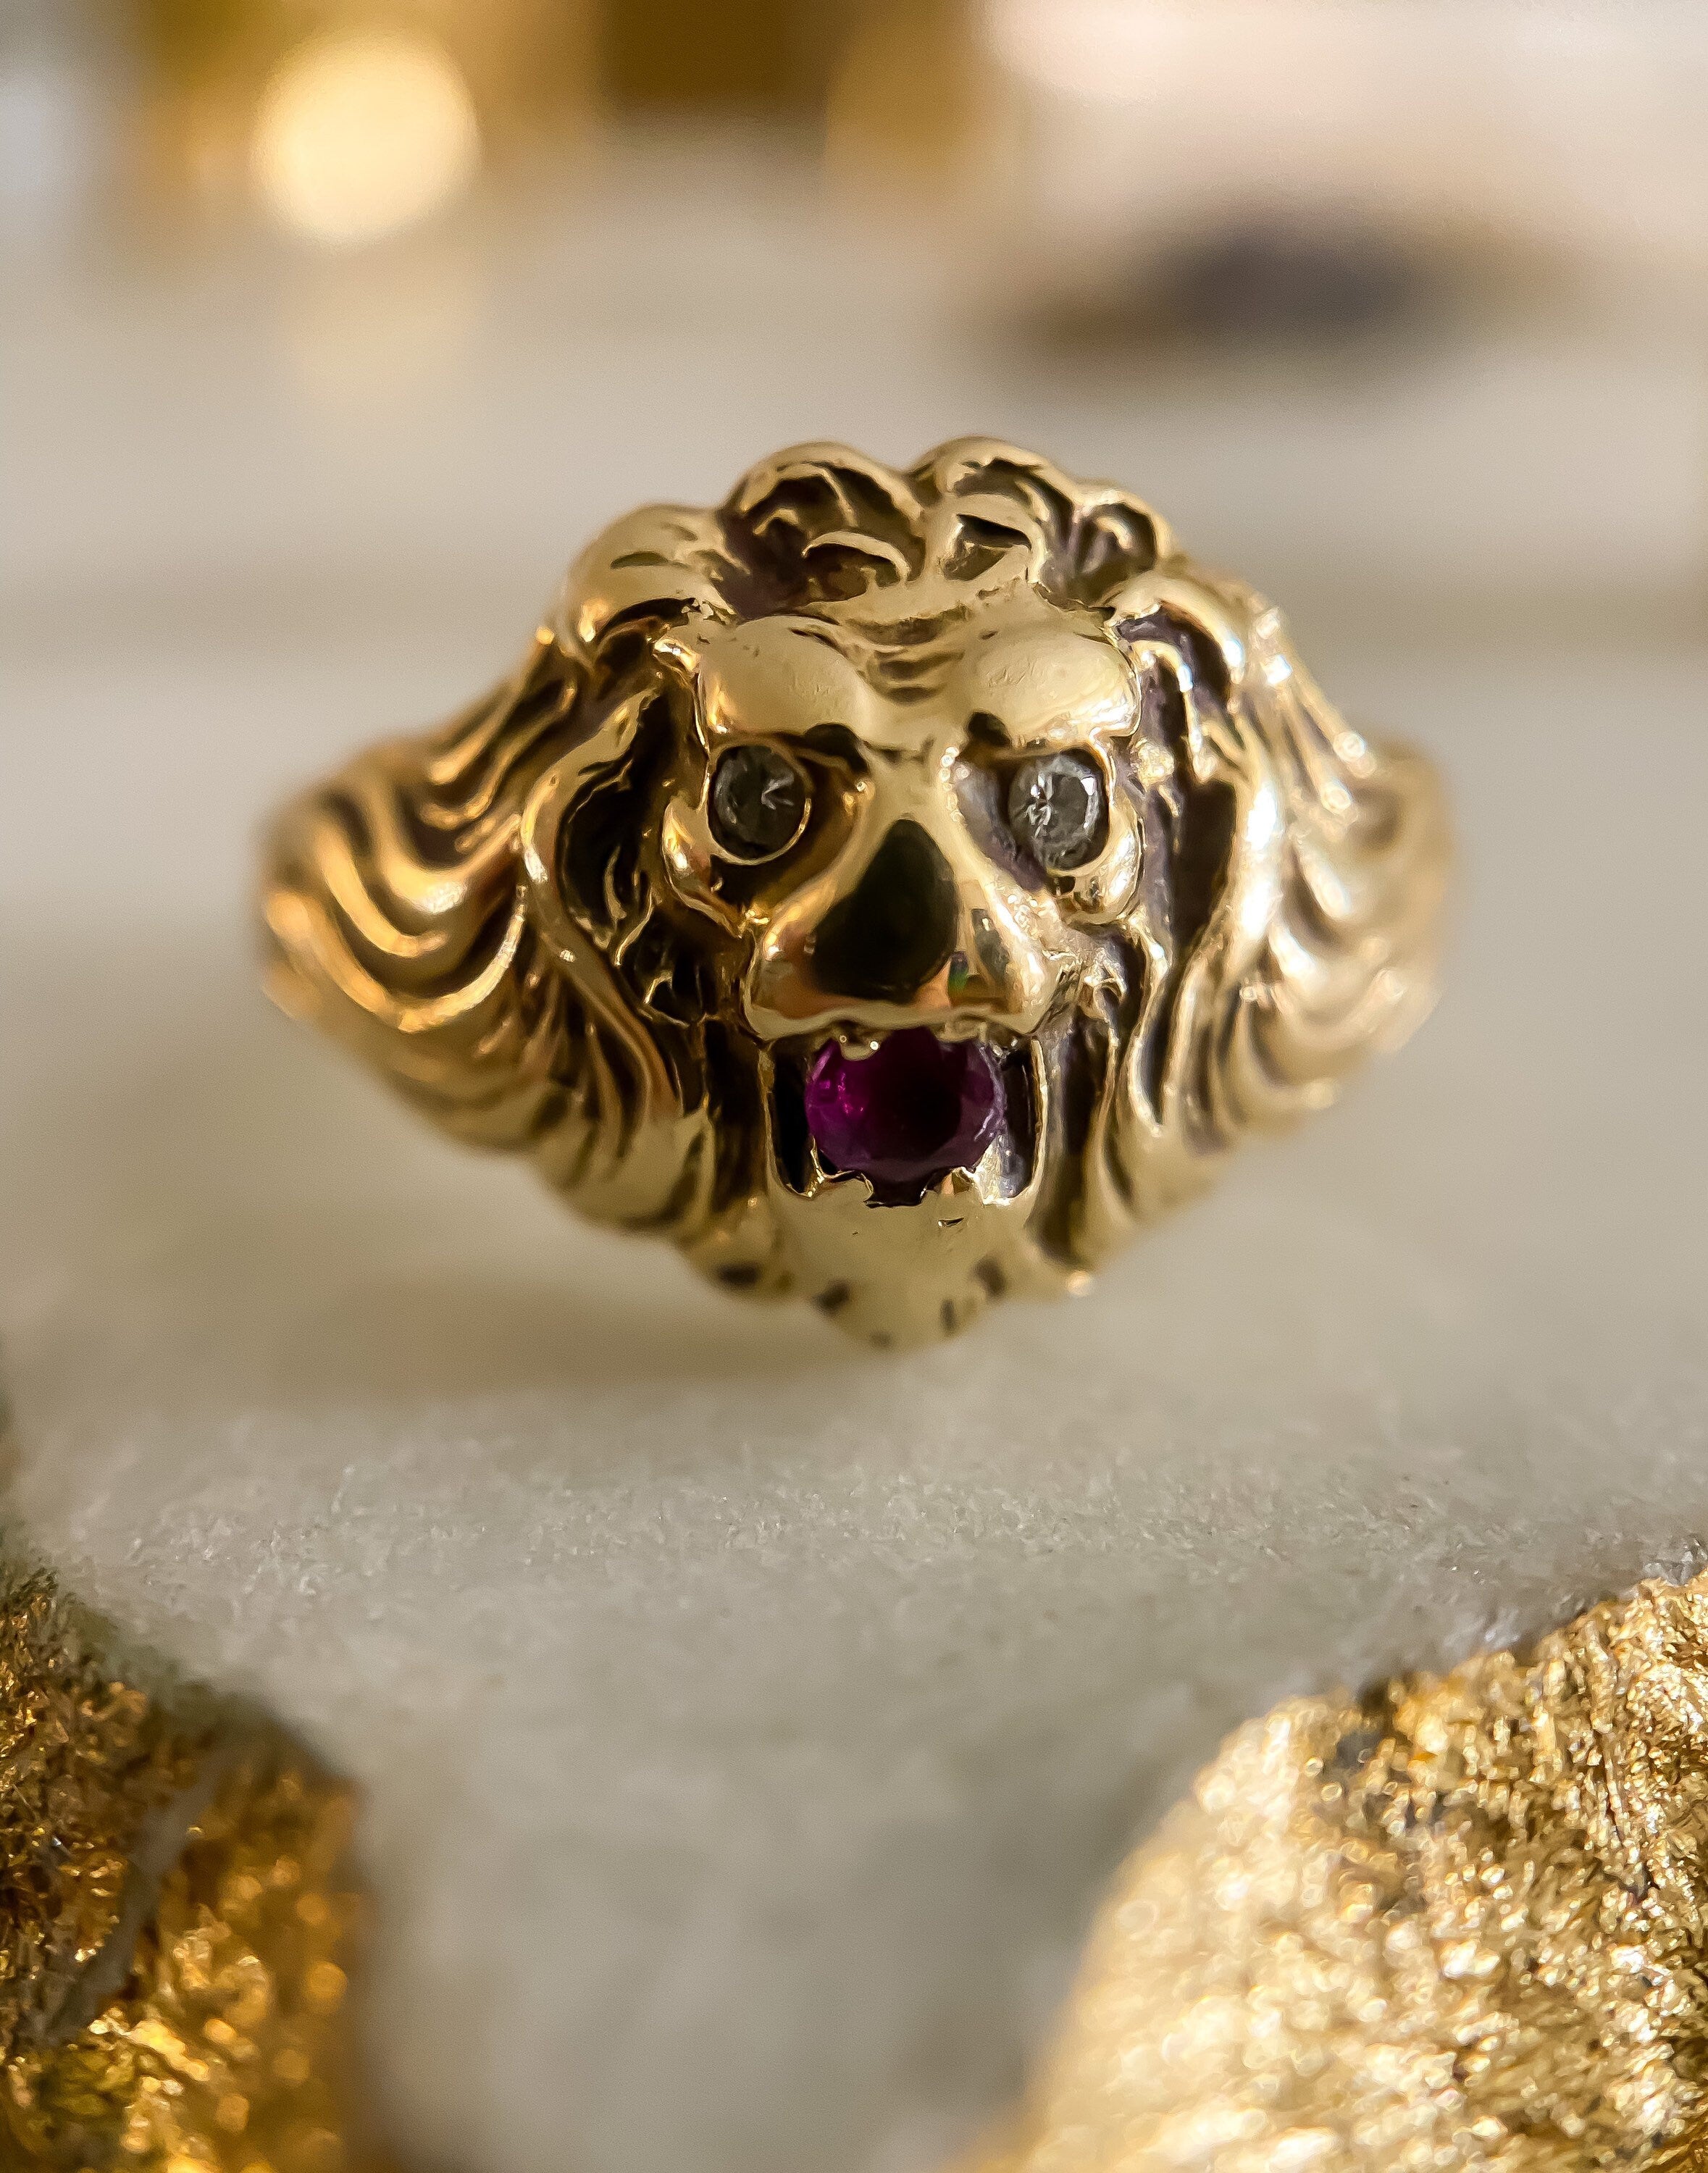 Rylos RYLOS Mens Rings 14K Yellow Gold Lion Head Ring Genuine Black Diamonds  Eyes and Gemstone Colorstone in Mouth Fun Designer